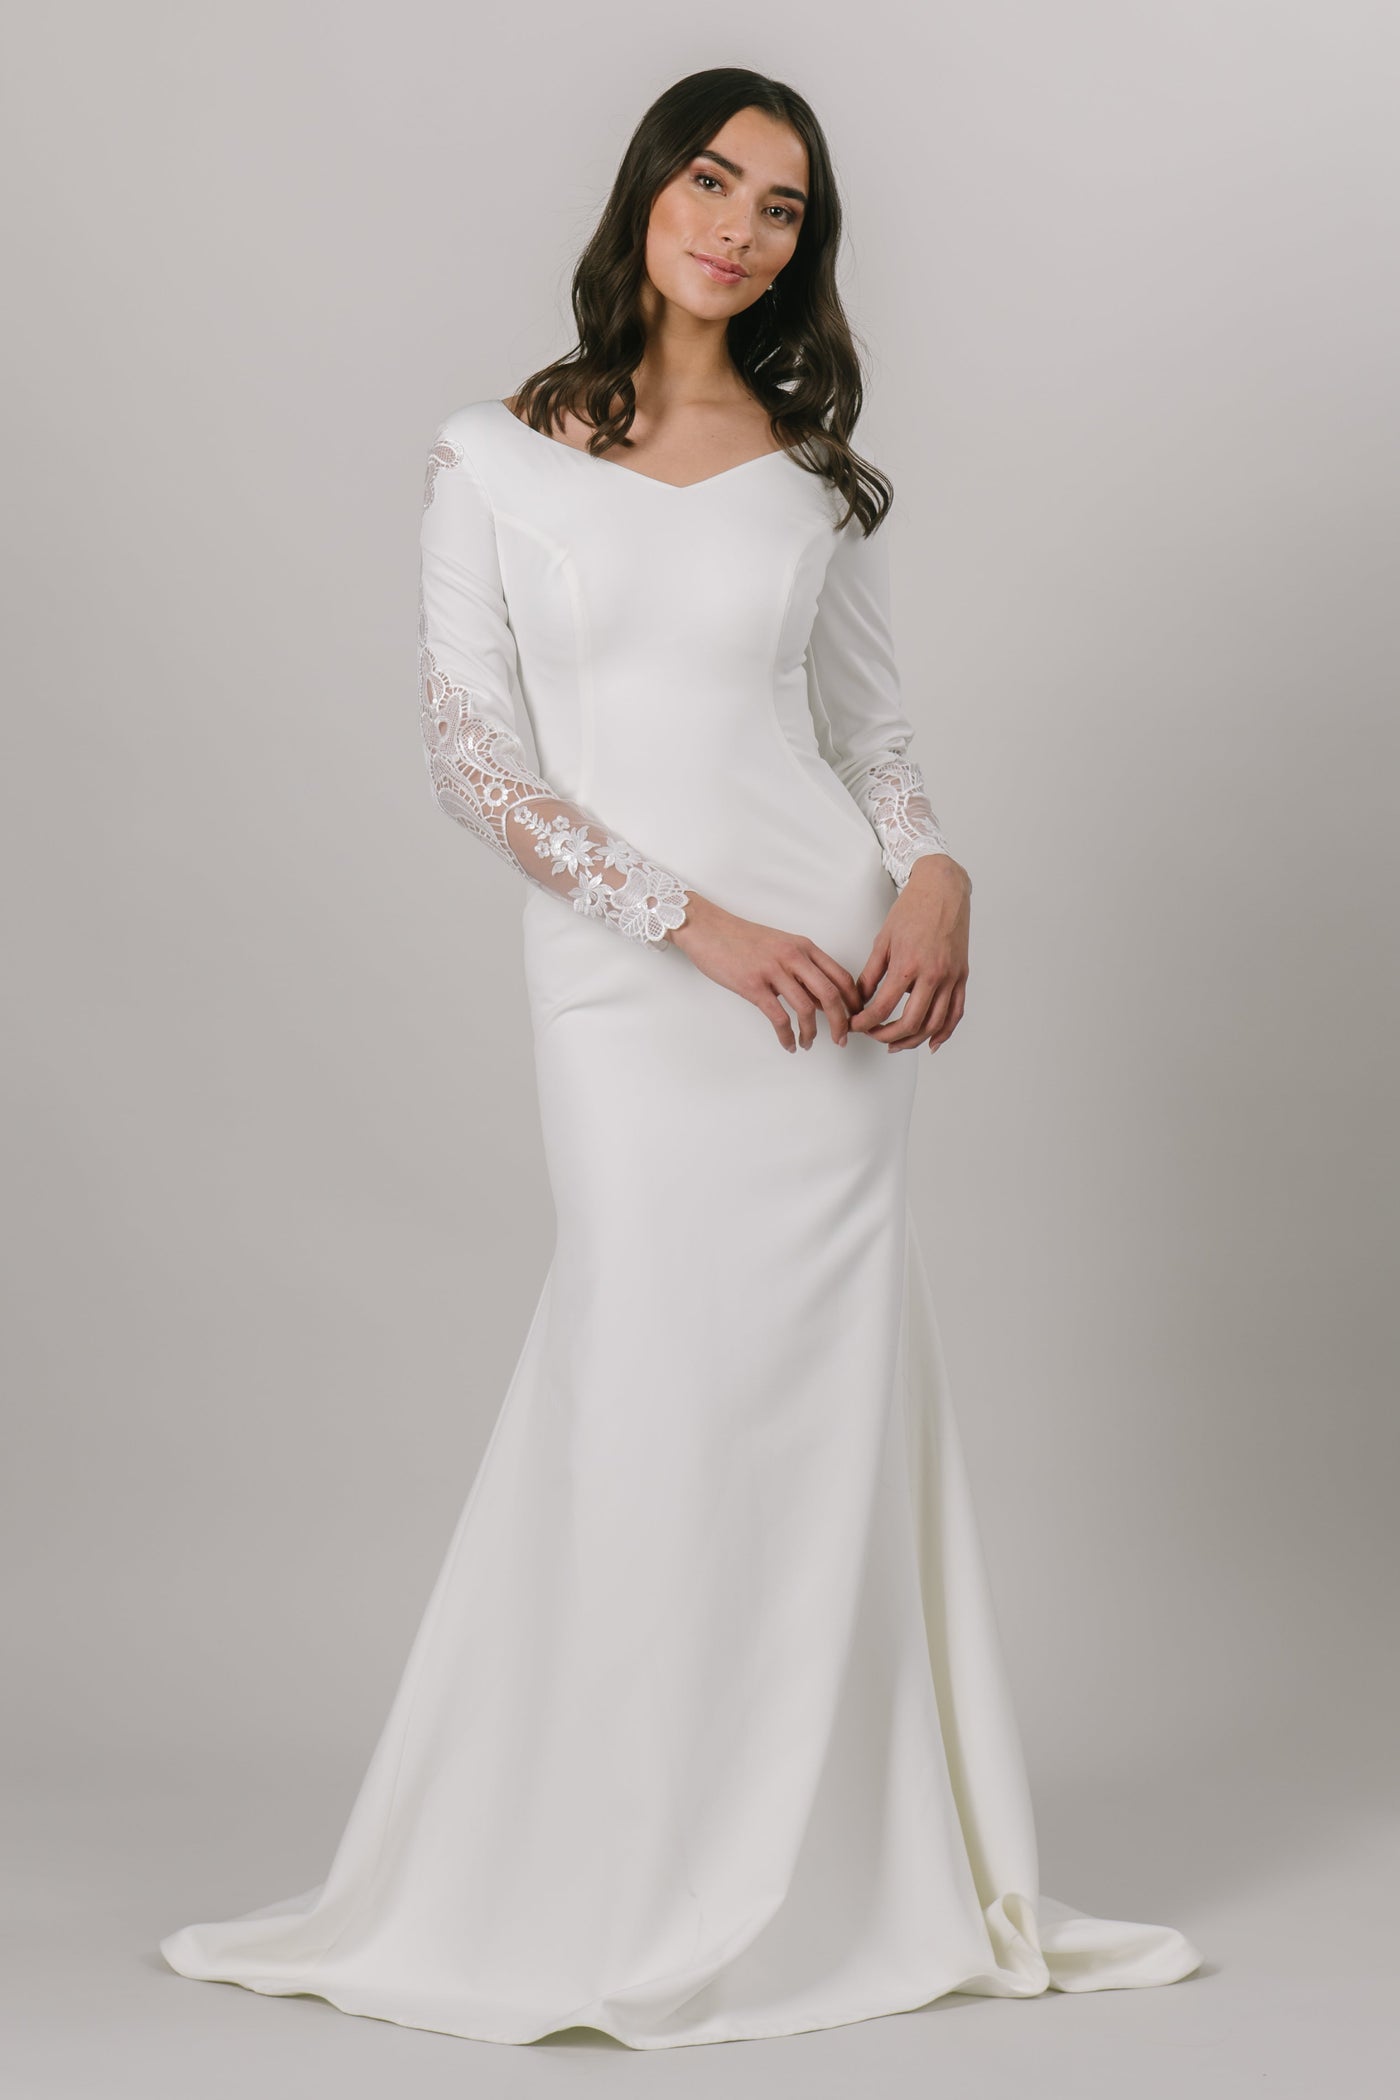 For all of our vivacious and fun brides, this modest wedding dress is for you. This fitted gown features long sleeves and a v-neckline. The otherwise simple dress has a gorgeous lace detail down the sides of the sleeves. 